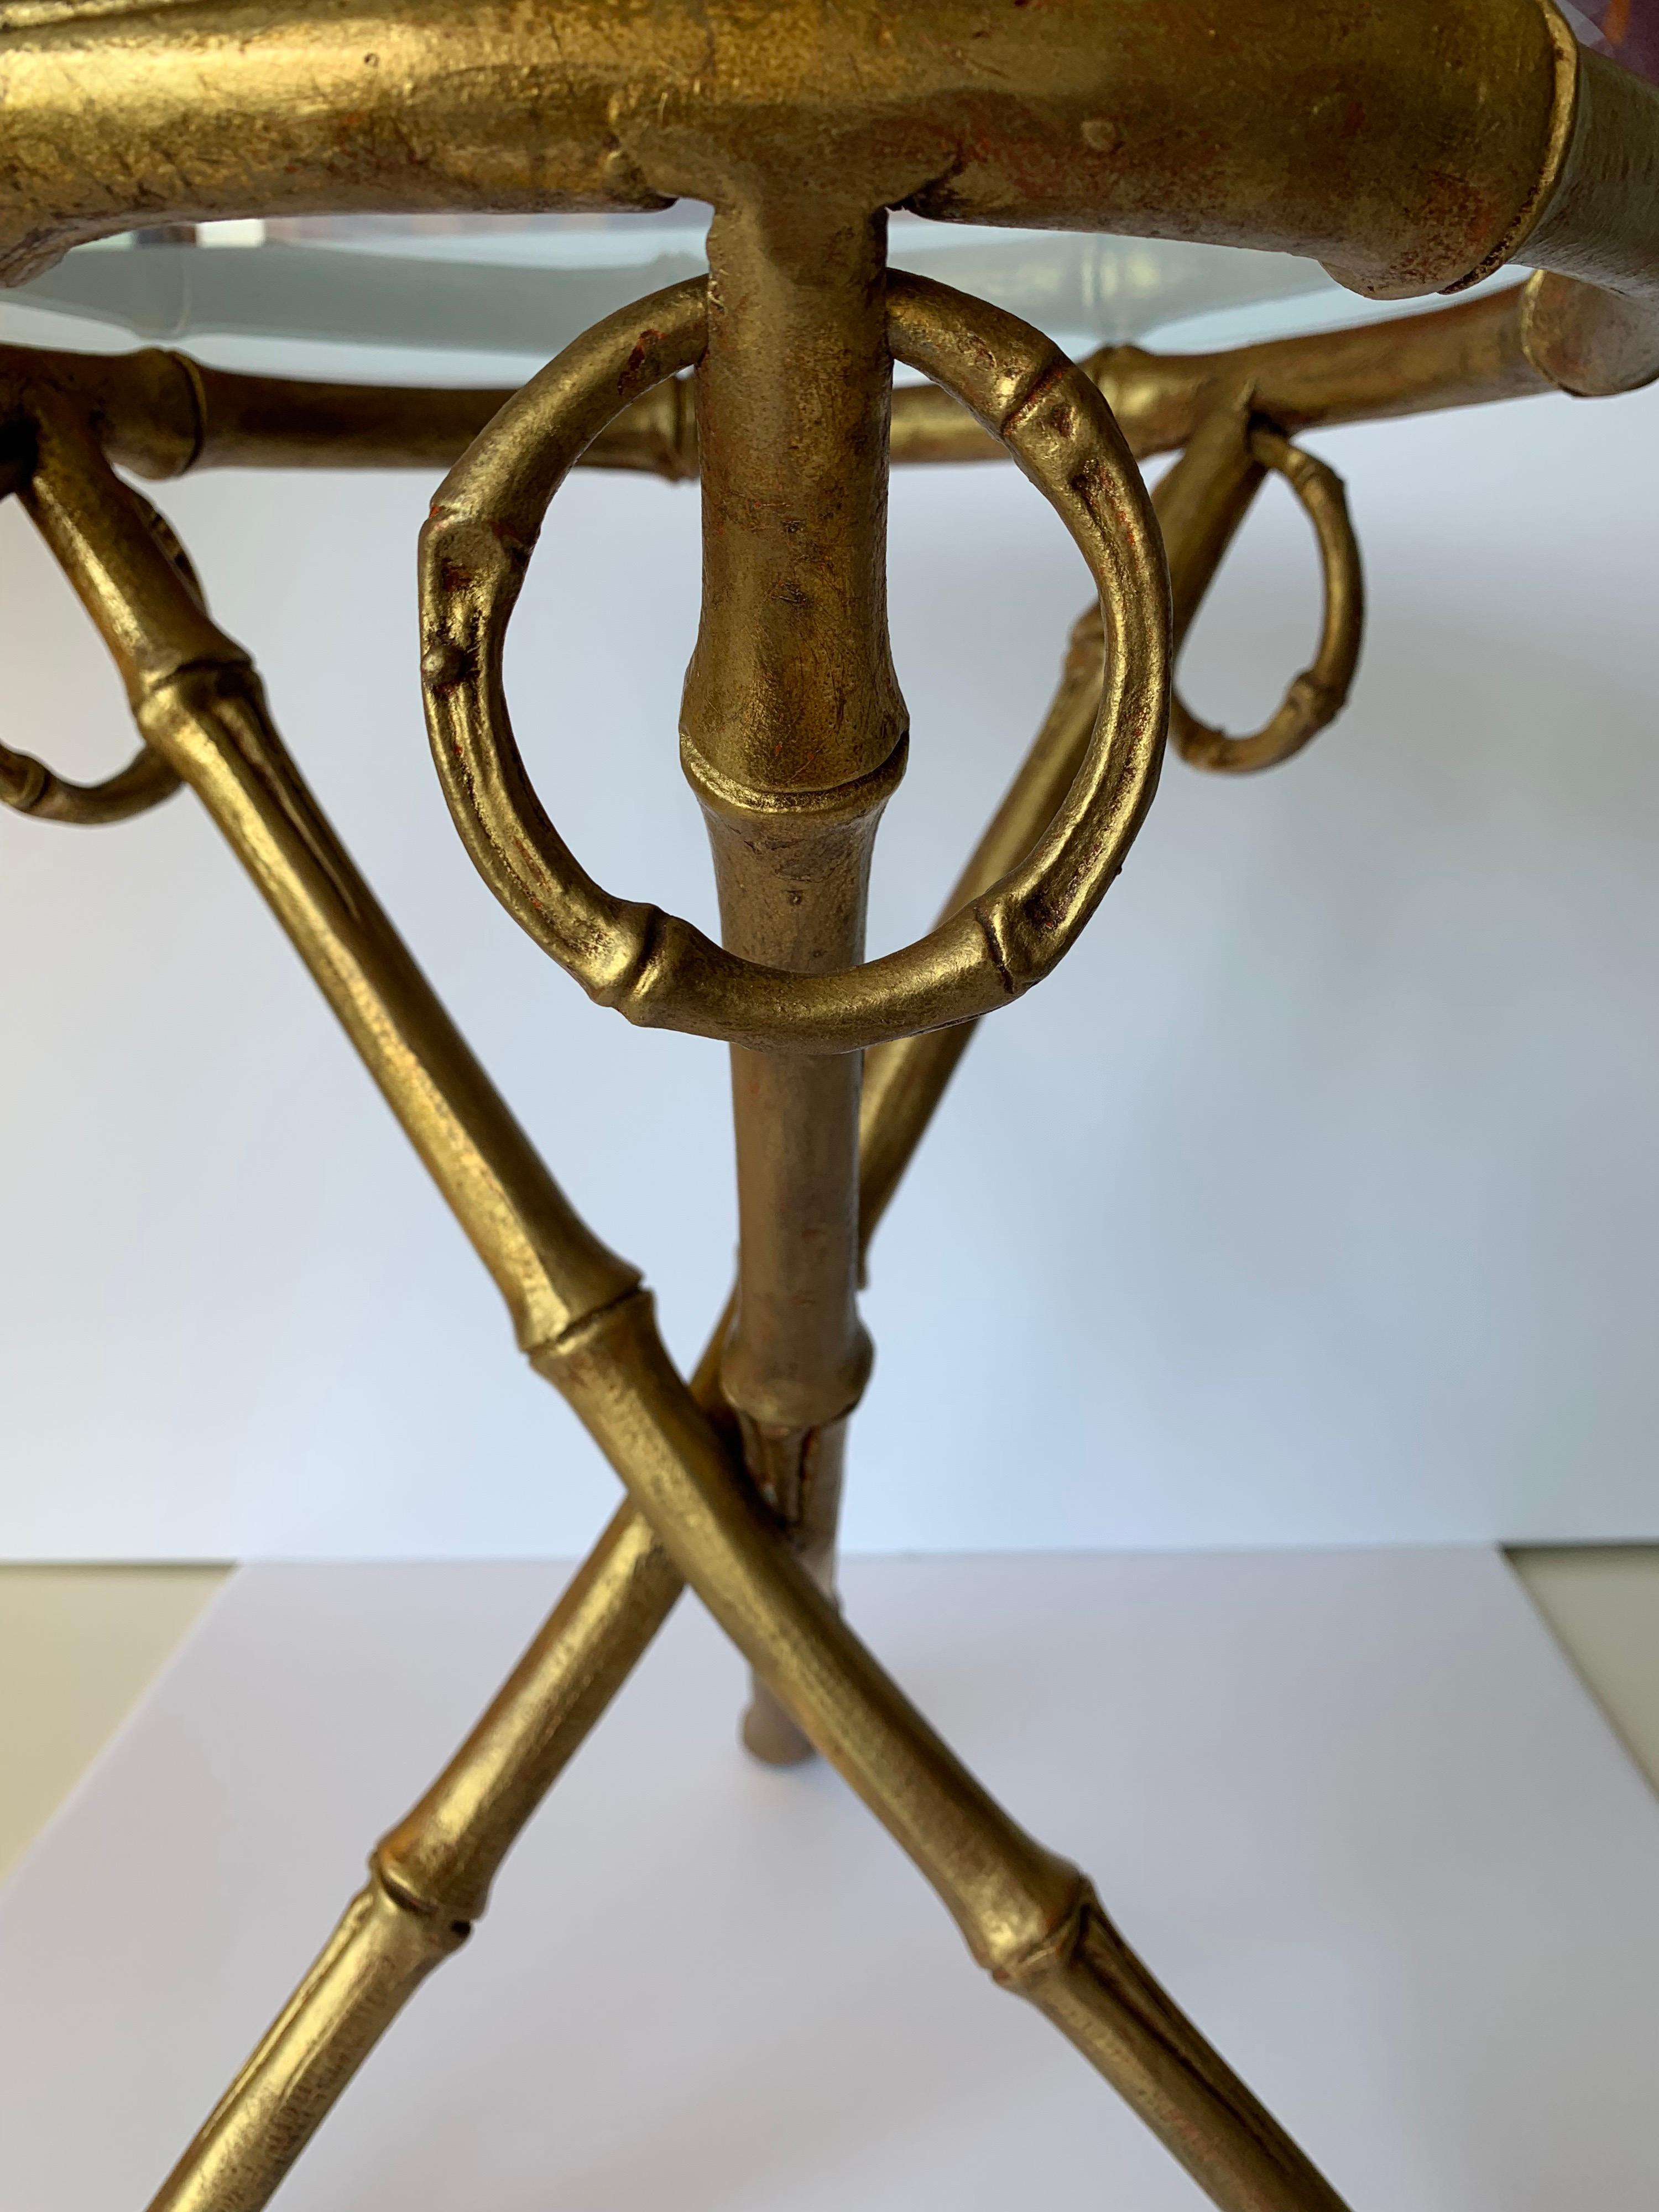 1960s gilt metal faux bamboo tripod style round accent table. New clear beveled glass top is 14” diameter.